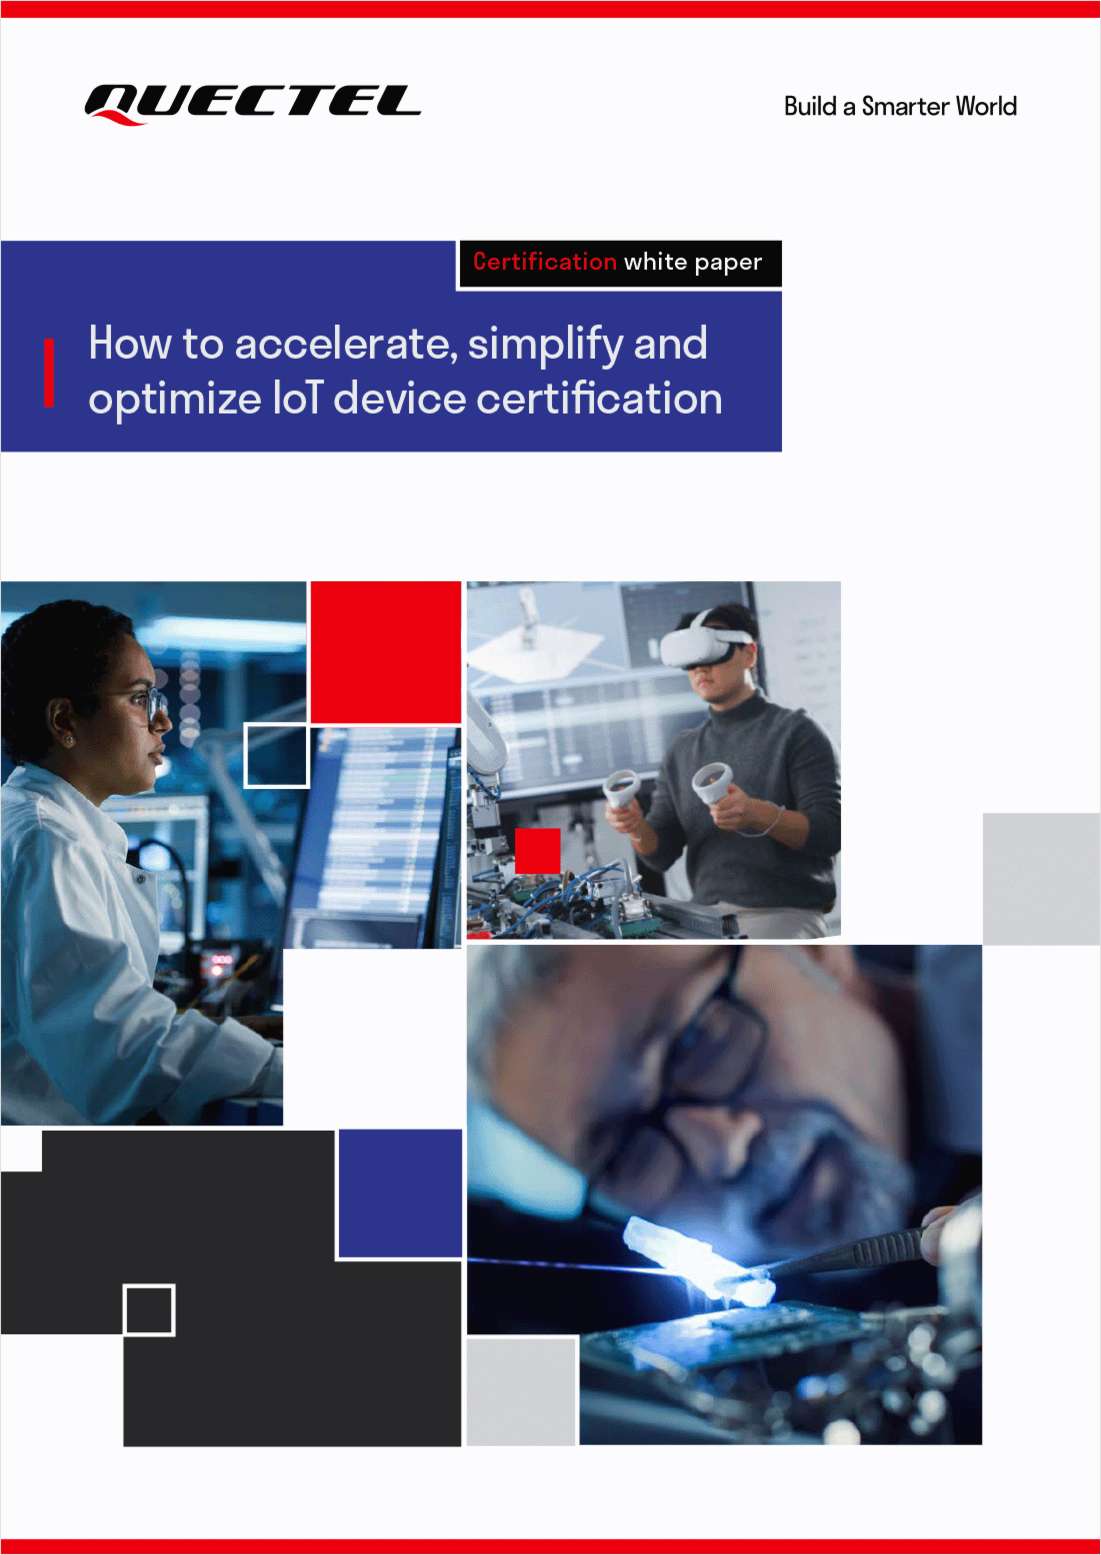 How to Accelerate, Simplify and Optimize IoT Device Certification